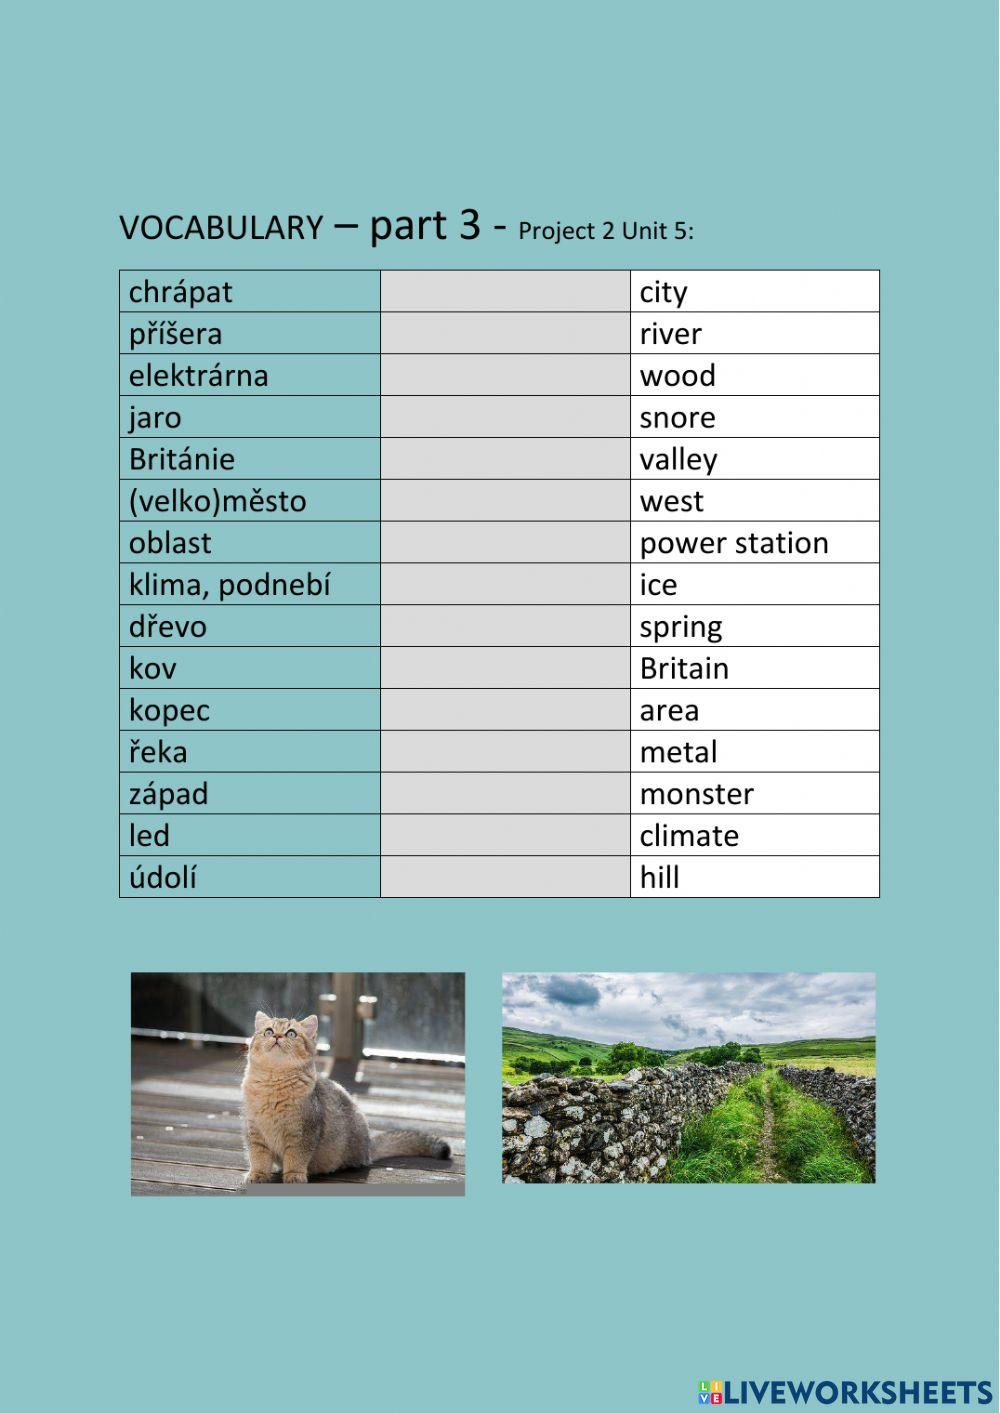 ANG 6 PROJECT 2 UNIT 5  - vocabulary - part 3 - drag and drop